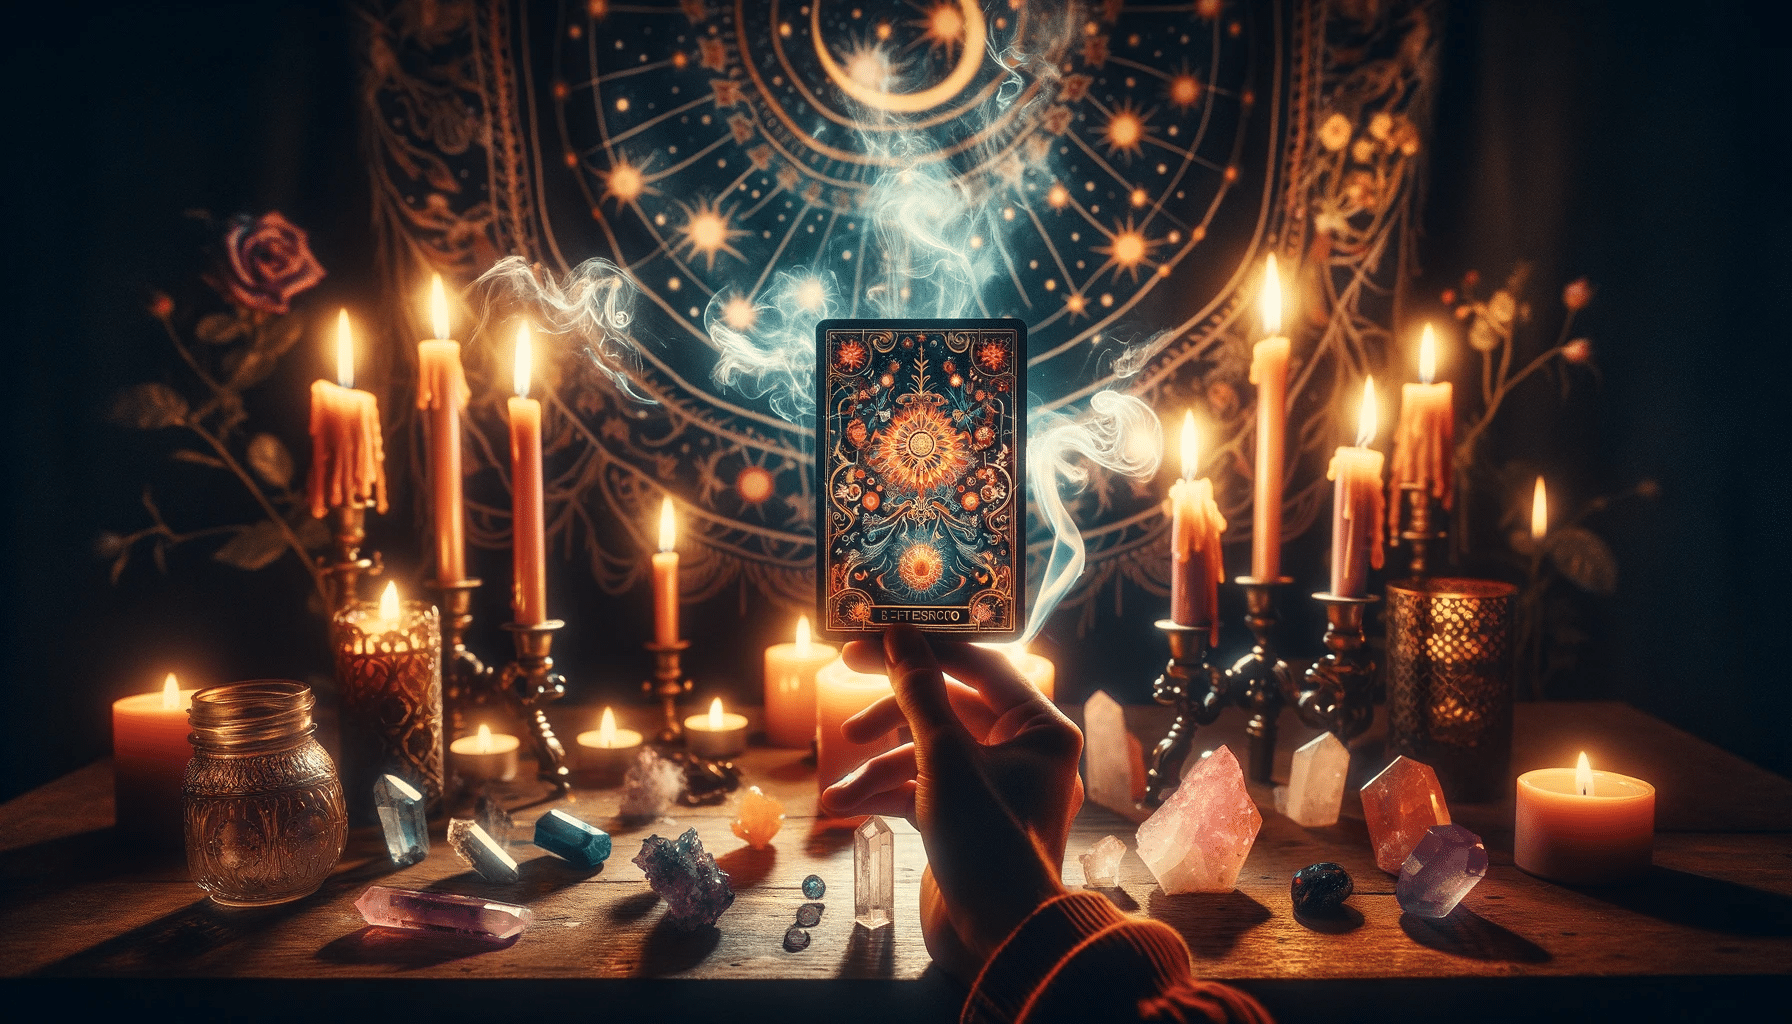 A hand turns a colorful Tarot card, surrounded by tarot card interpretation symbols meanings, crystals, and incense in a candlelit room with a starry tapestry.